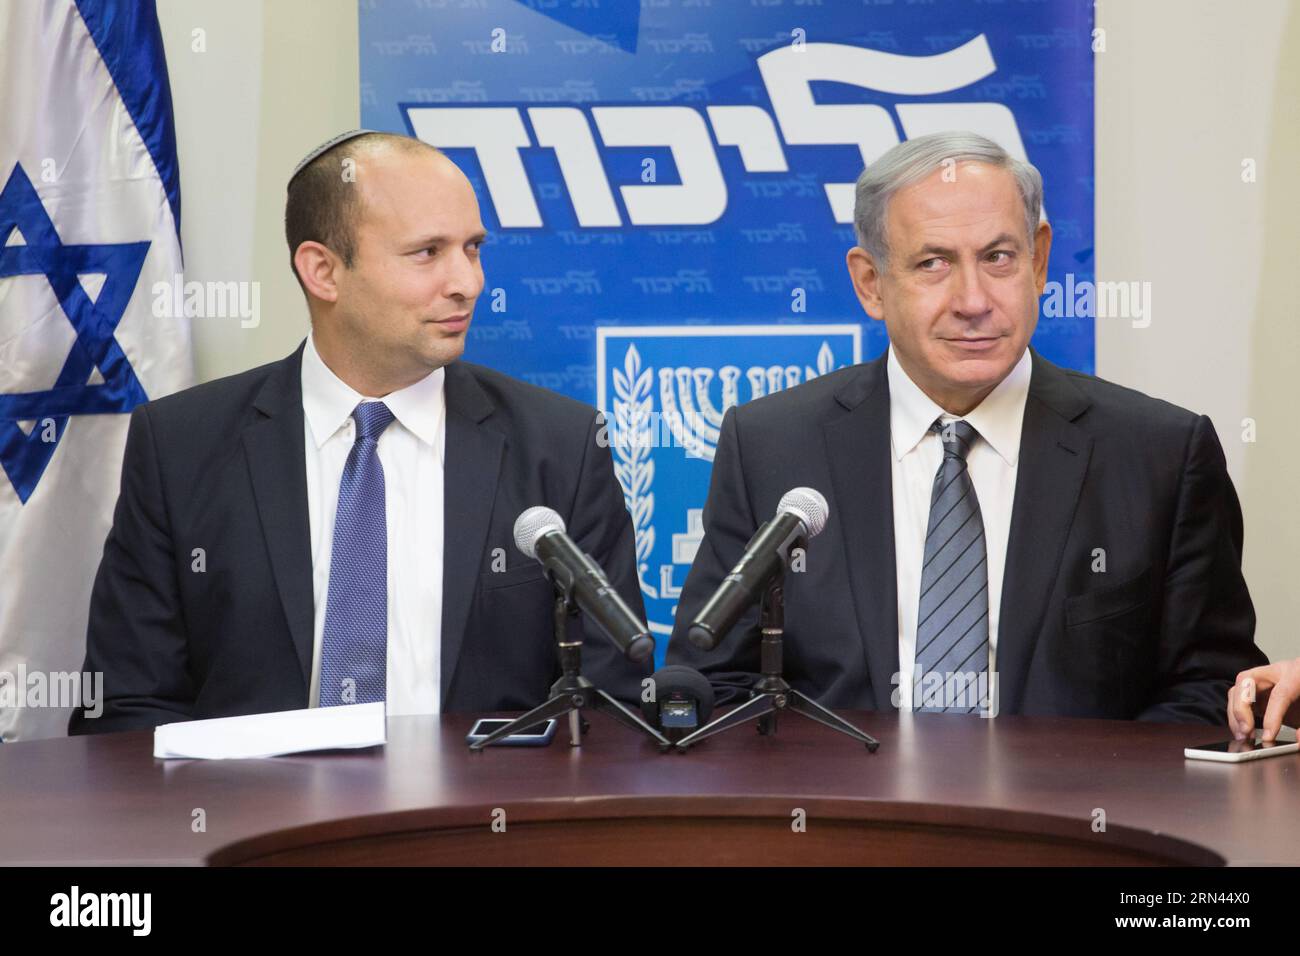 (150507) -- JERUSALEM, May 6, 2015 -- Israeli Prime Minister Benjamin Netanyahu (R) and Jewish Home party leader Naftali Bennett hold a press conference in Jerusalem May 6, 2015. Benjamin Netanyahu managed to clinch a deal with the nationalist Jewish Home party late Wednesday night, securing a new ruling coalition with a tiny majority in the 120-member parliament. ) ISRAEL-NEW COALITION-PRESS CONFERENCE JINI PUBLICATIONxNOTxINxCHN   Jerusalem May 6 2015 Israeli Prime Ministers Benjamin Netanyahu r and Jewish Home Party Leader Naftali Bennett Hold a Press Conference in Jerusalem May 6 2015 Benj Stock Photo